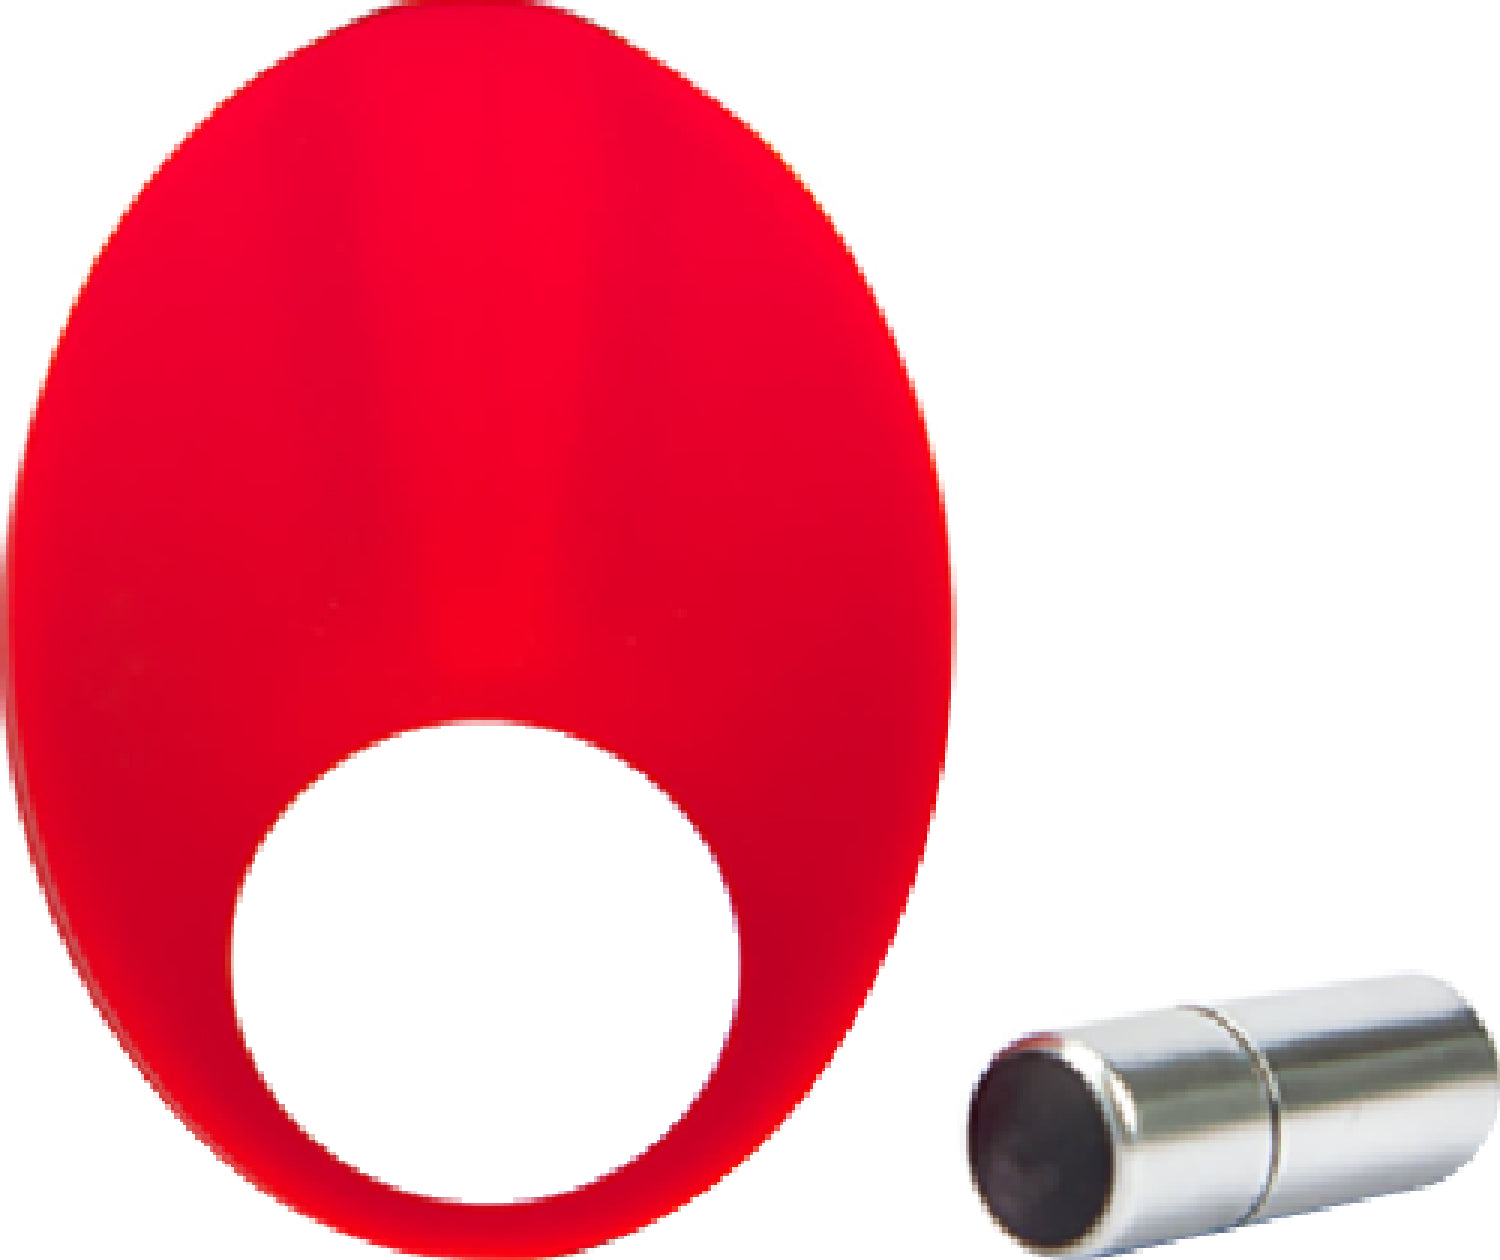 Caliber Vibrating Silicone Cock Ring (Red)  - Club X